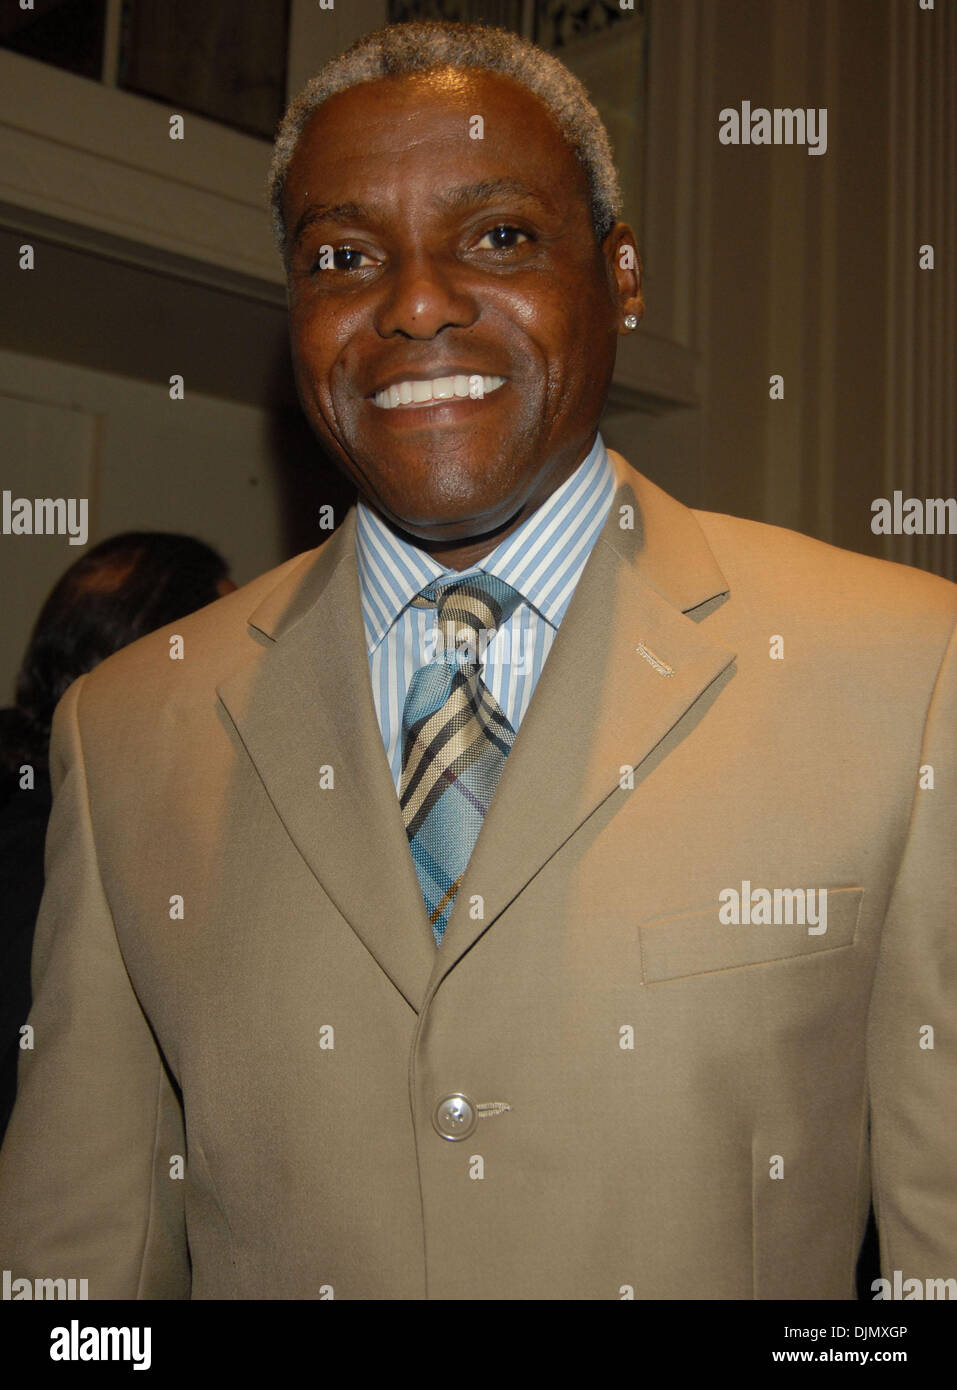 Sep 27, 2010 - New York, New York, U.S. - Former American track and field athlete who won 10 Olympic medals CARL LEWIS at the 25th Anniversary of the Great Sports Legends Dinner at the Waldorf Astoria in NYC. (Credit Image: © Jeffrey Geller/ZUMApress.com) Stock Photo